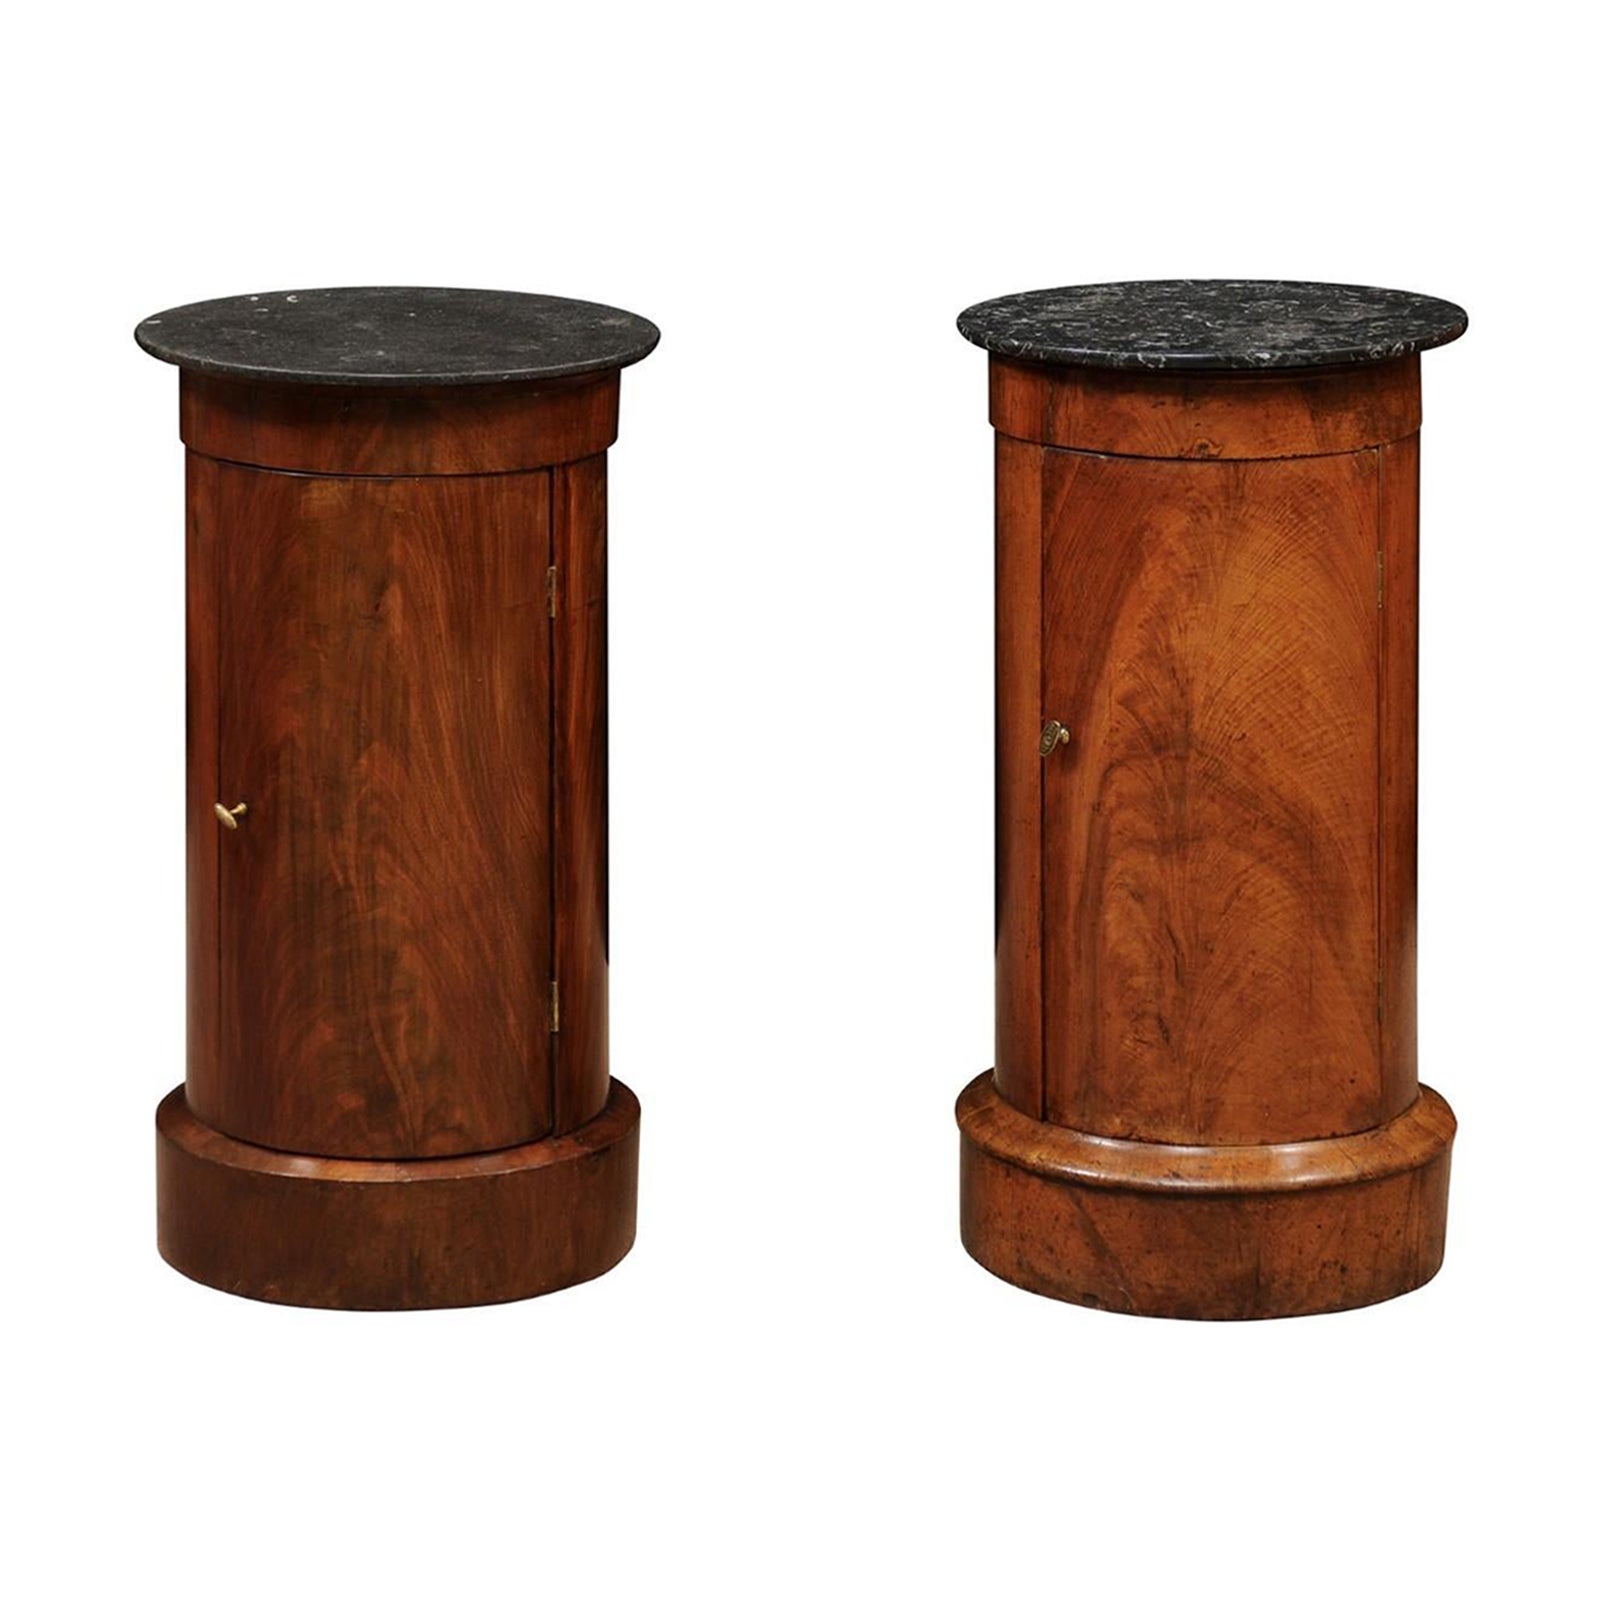 Matched Pair of Cylindrical Cabinets in Mahogany with Black Marble Tops